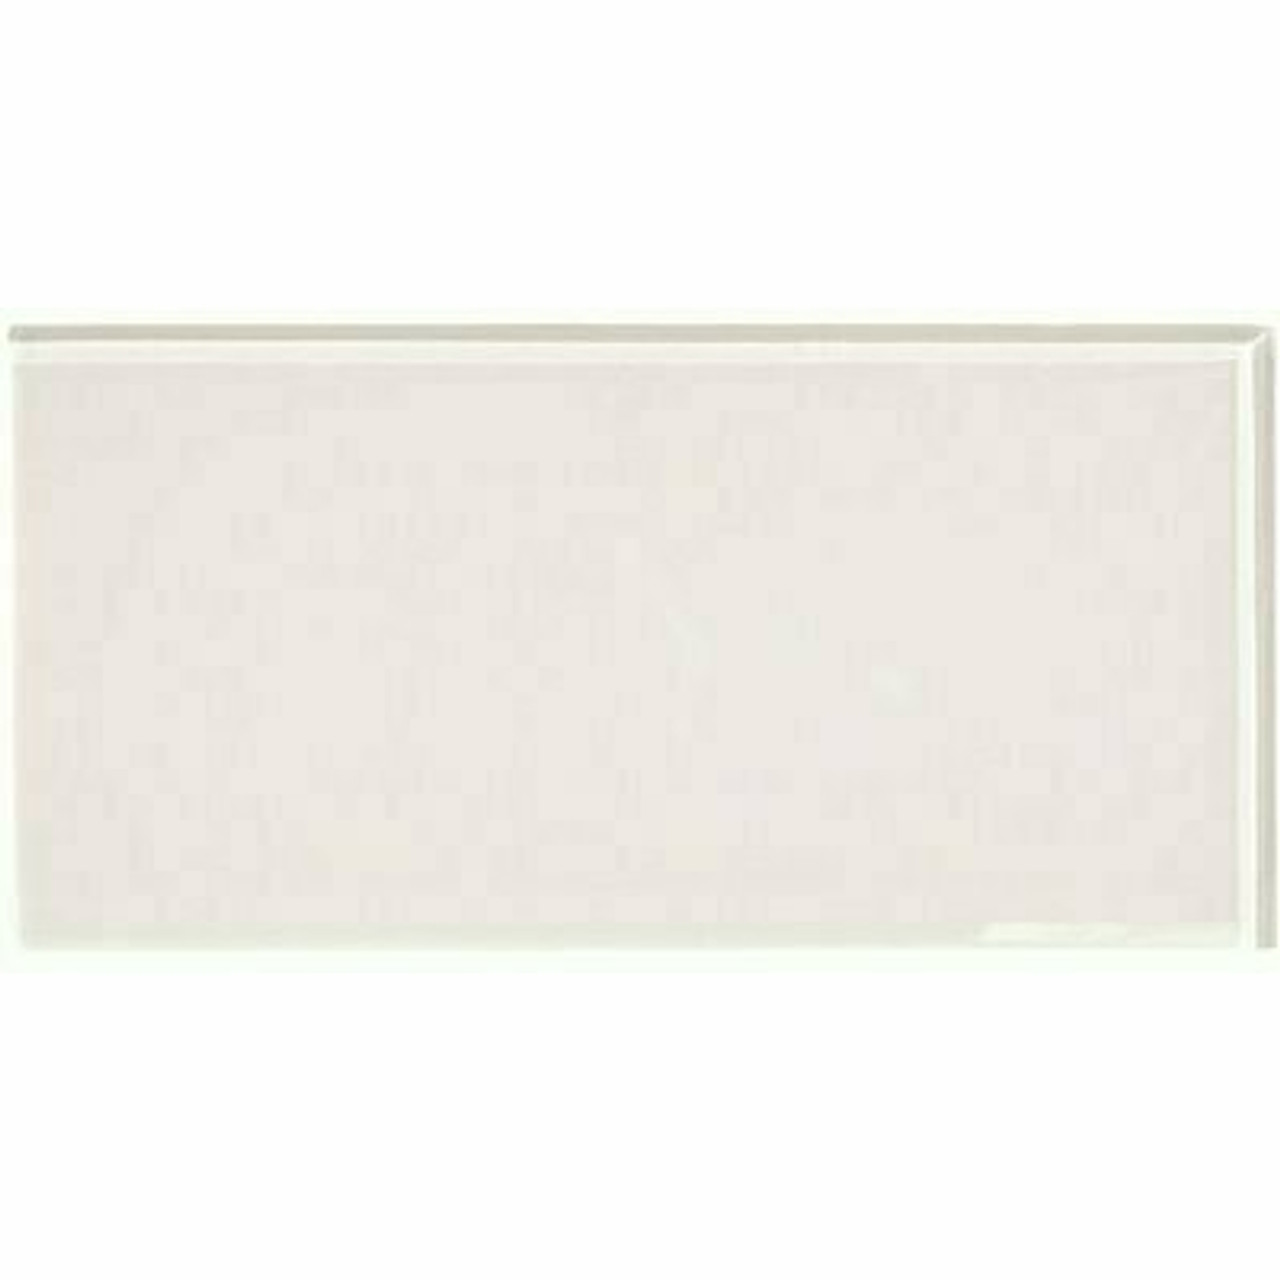 Aspect 6 In. X 3 In. Frost Glass Decorative Wall Tile (8-Pack)